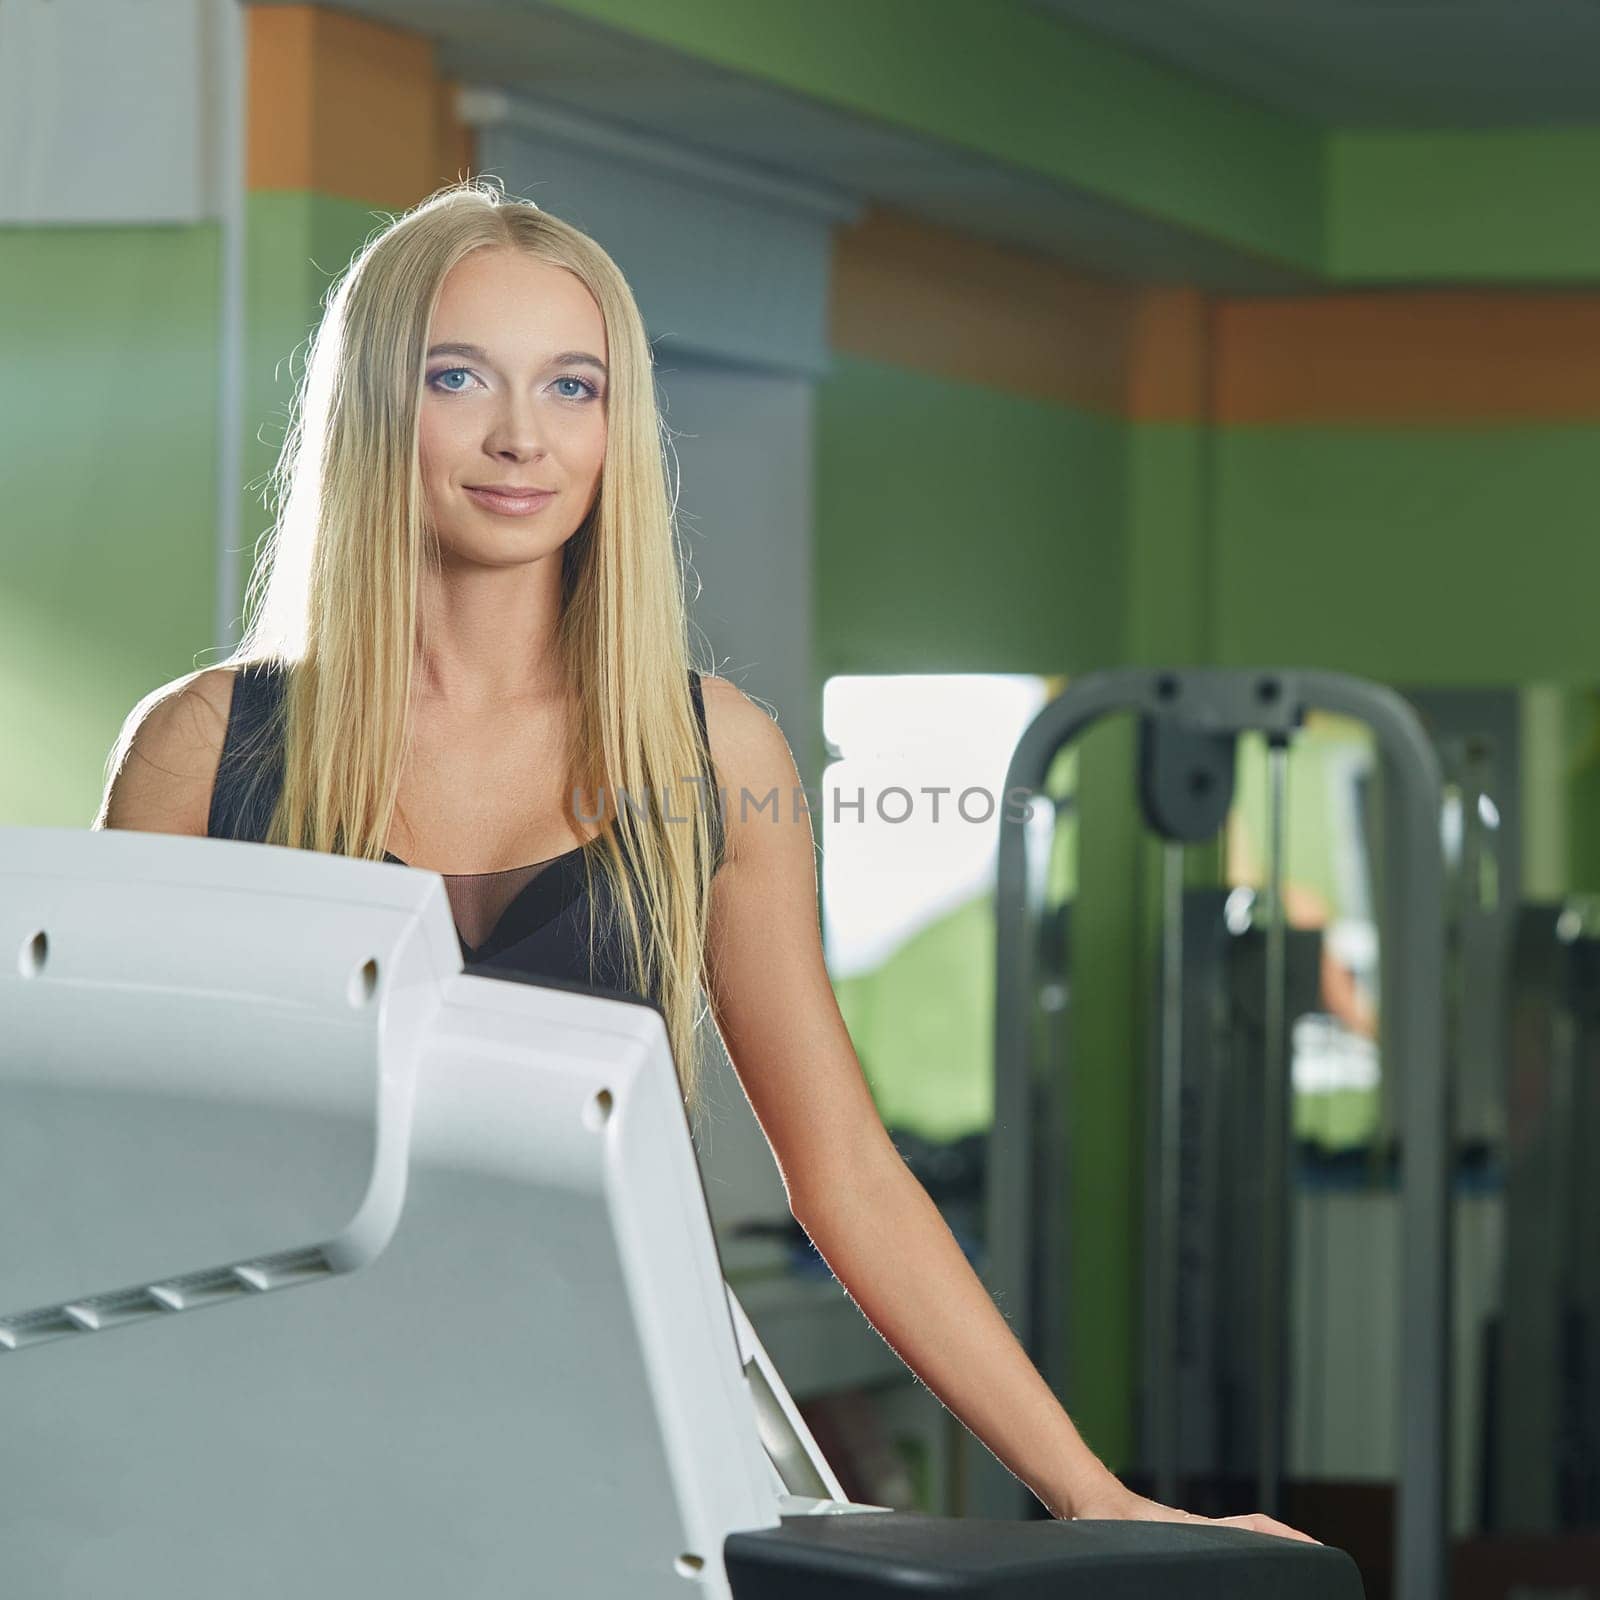 Gym. Image of attractive blonde exercising on treadmill